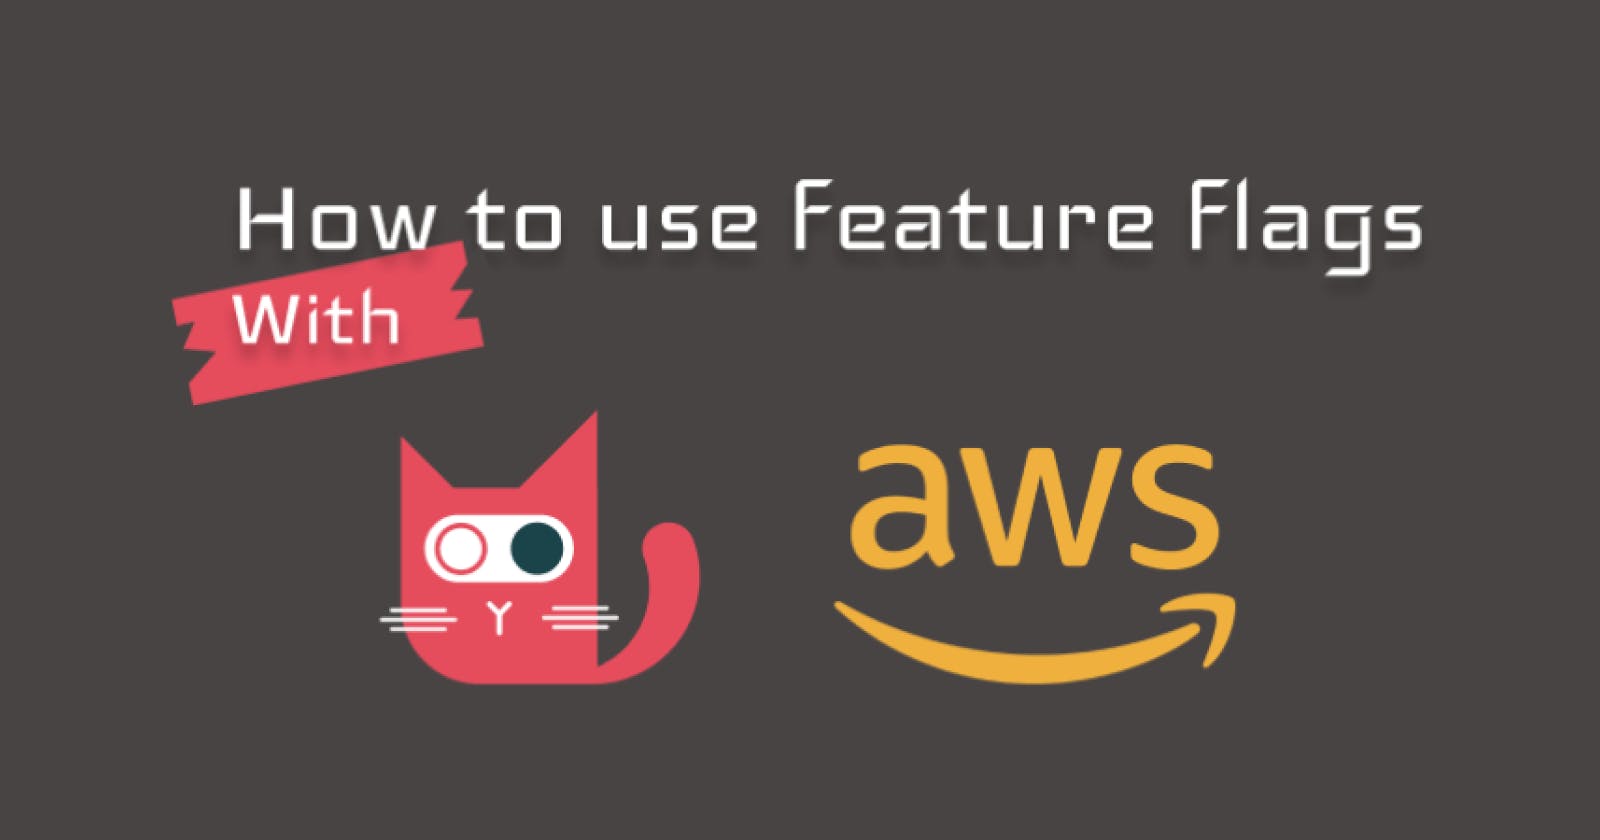 How to use feature flags with AWS Lambda